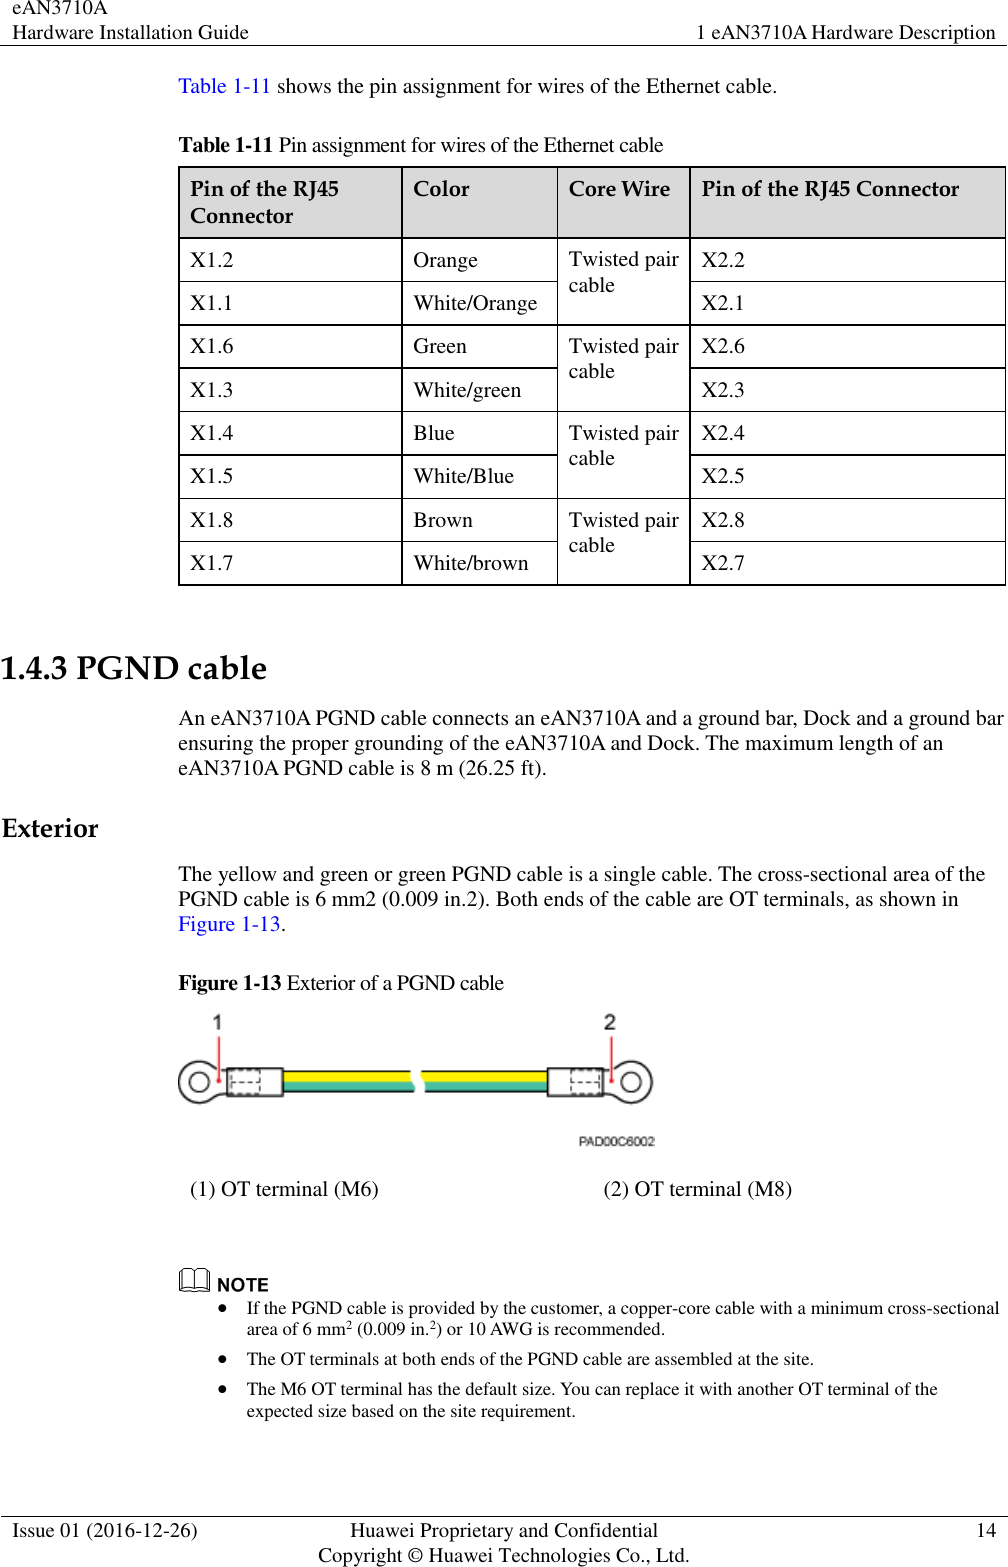 eAN3710A Hardware Installation Guide 1 eAN3710A Hardware Description  Issue 01 (2016-12-26) Huawei Proprietary and Confidential                                     Copyright © Huawei Technologies Co., Ltd. 14  Table 1-11 shows the pin assignment for wires of the Ethernet cable. Table 1-11 Pin assignment for wires of the Ethernet cable Pin of the RJ45 Connector Color Core Wire Pin of the RJ45 Connector X1.2 Orange Twisted pair cable X2.2 X1.1 White/Orange X2.1 X1.6 Green Twisted pair cable X2.6 X1.3 White/green X2.3 X1.4 Blue Twisted pair cable X2.4 X1.5 White/Blue X2.5 X1.8 Brown Twisted pair cable X2.8 X1.7 White/brown X2.7  1.4.3 PGND cable An eAN3710A PGND cable connects an eAN3710A and a ground bar, Dock and a ground bar ensuring the proper grounding of the eAN3710A and Dock. The maximum length of an eAN3710A PGND cable is 8 m (26.25 ft).   Exterior The yellow and green or green PGND cable is a single cable. The cross-sectional area of the PGND cable is 6 mm2 (0.009 in.2). Both ends of the cable are OT terminals, as shown in Figure 1-13.   Figure 1-13 Exterior of a PGND cable    (1) OT terminal (M6) (2) OT terminal (M8)    If the PGND cable is provided by the customer, a copper-core cable with a minimum cross-sectional area of 6 mm2 (0.009 in.2) or 10 AWG is recommended.  The OT terminals at both ends of the PGND cable are assembled at the site.  The M6 OT terminal has the default size. You can replace it with another OT terminal of the expected size based on the site requirement. 